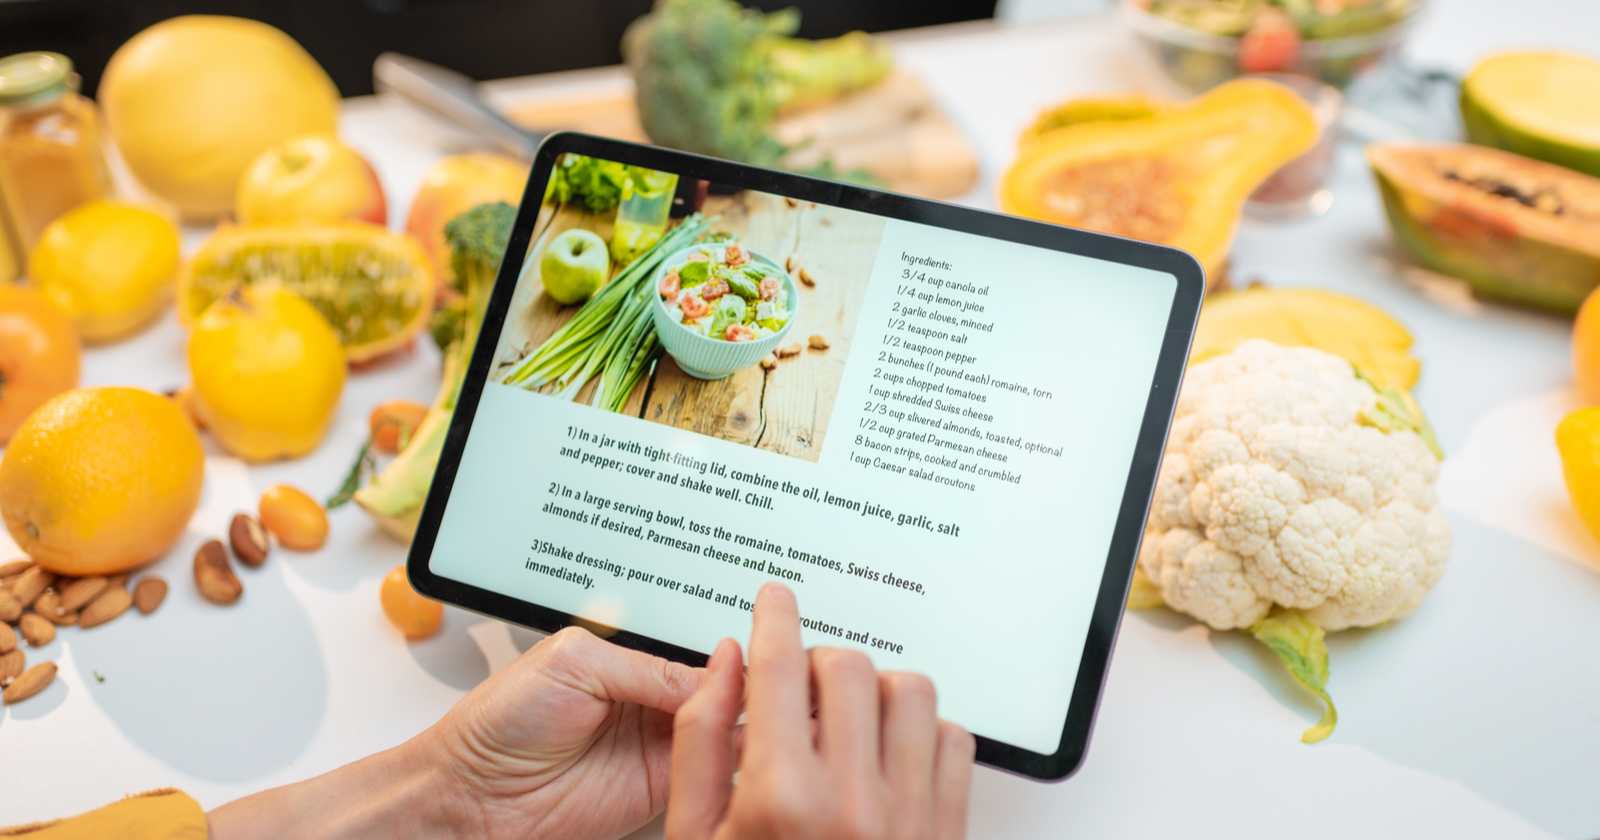 Google On Recipe Pages – Are They Getting Too Long? via @sejournal, @MattGSouthern